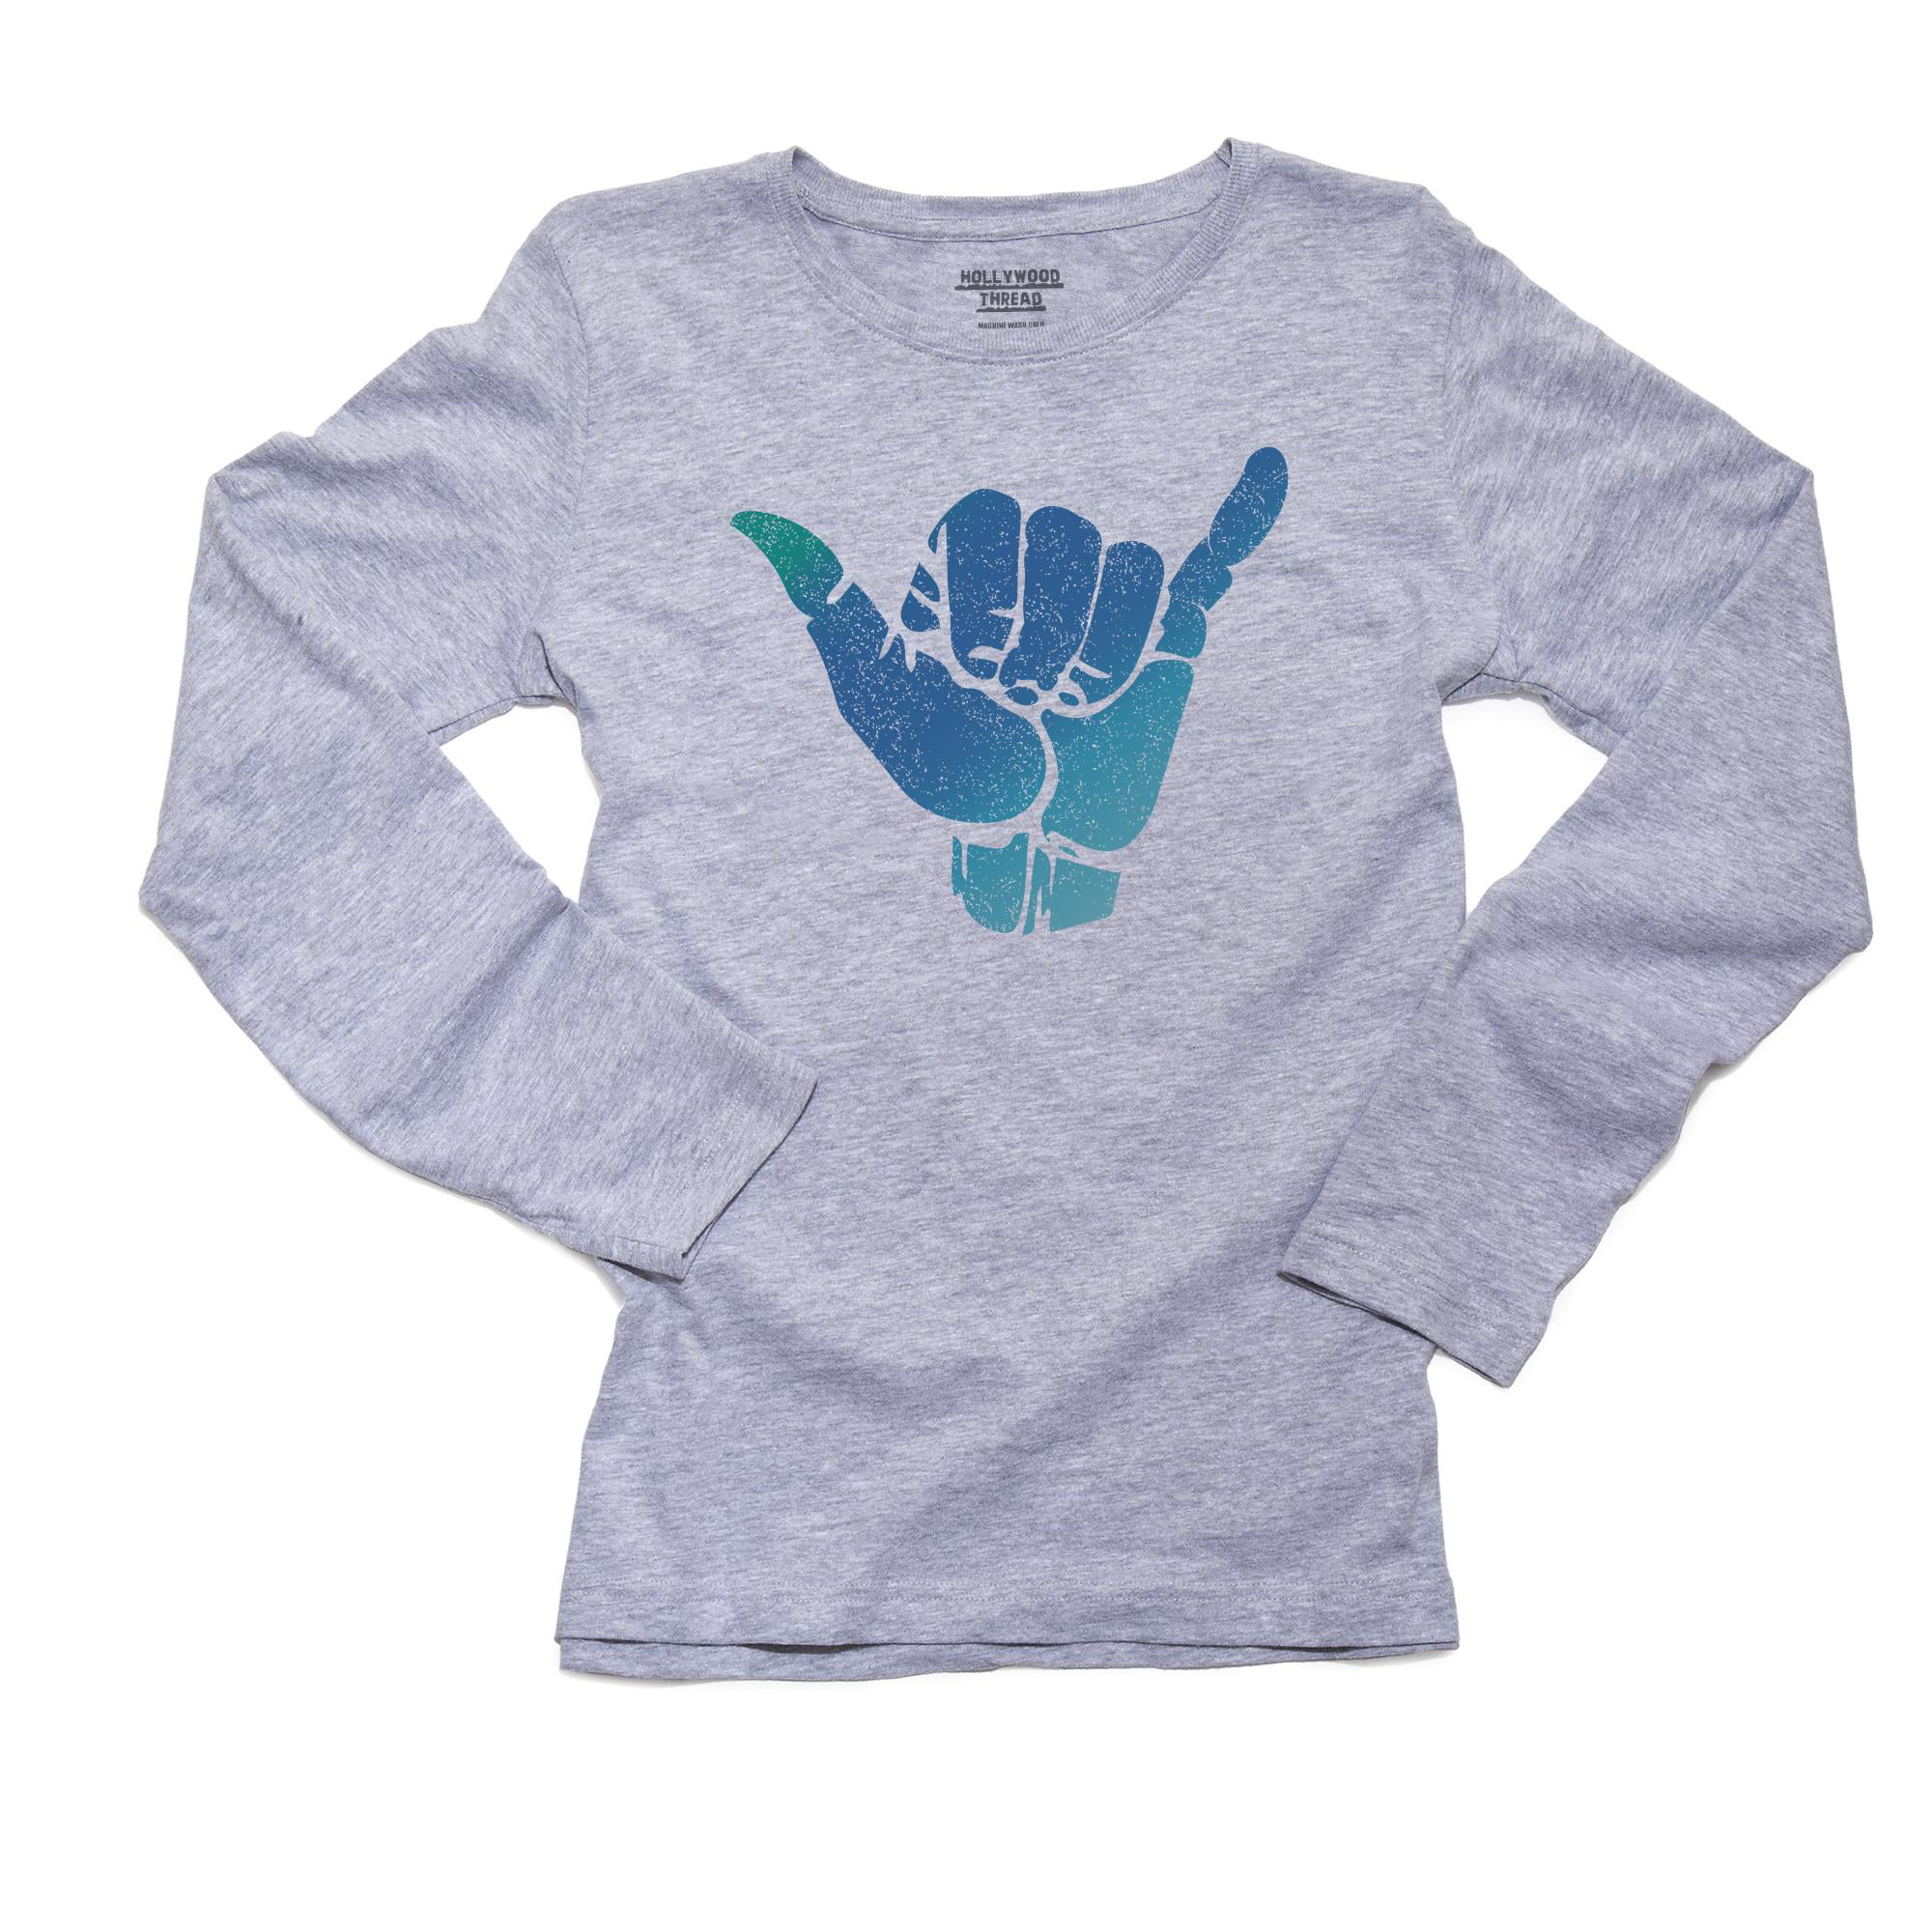 Buy > women's long sleeve surf t shirts > in stock